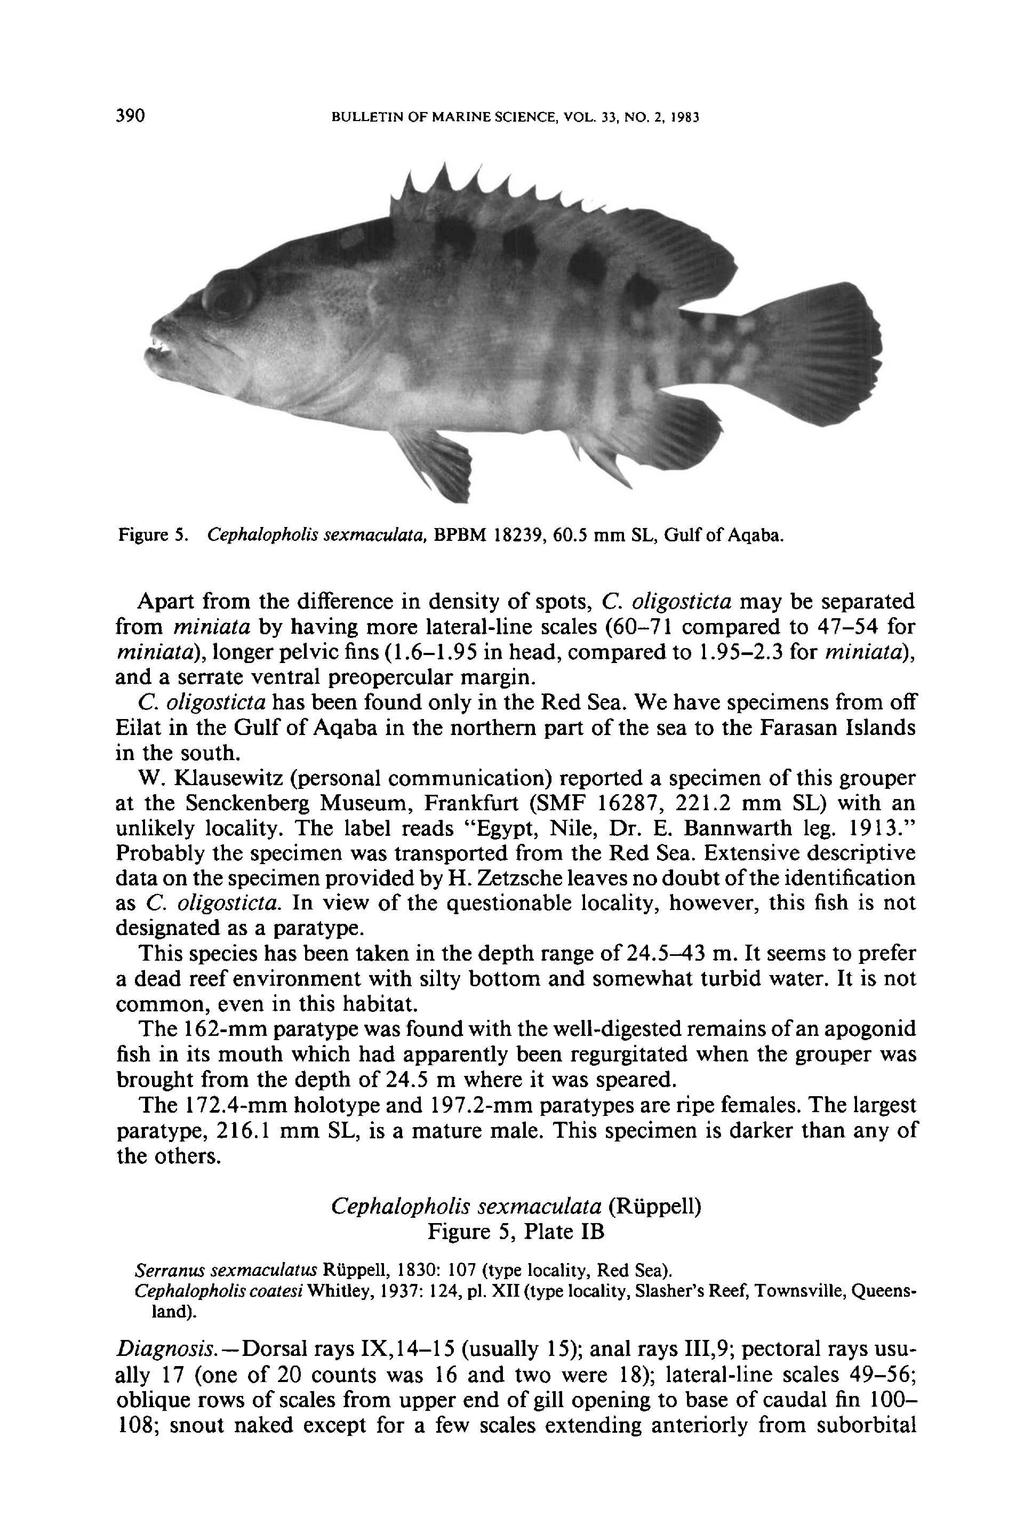 390 BULLETIN OF MARINE SCIENCE, VOL. 33, NO.2, 1983 Figure 5. Cephalopholis sexmaculata. BPBM 18239,60.5 mm SL, Gulf of Aqaba. Apart from the difference in density of spots, e.